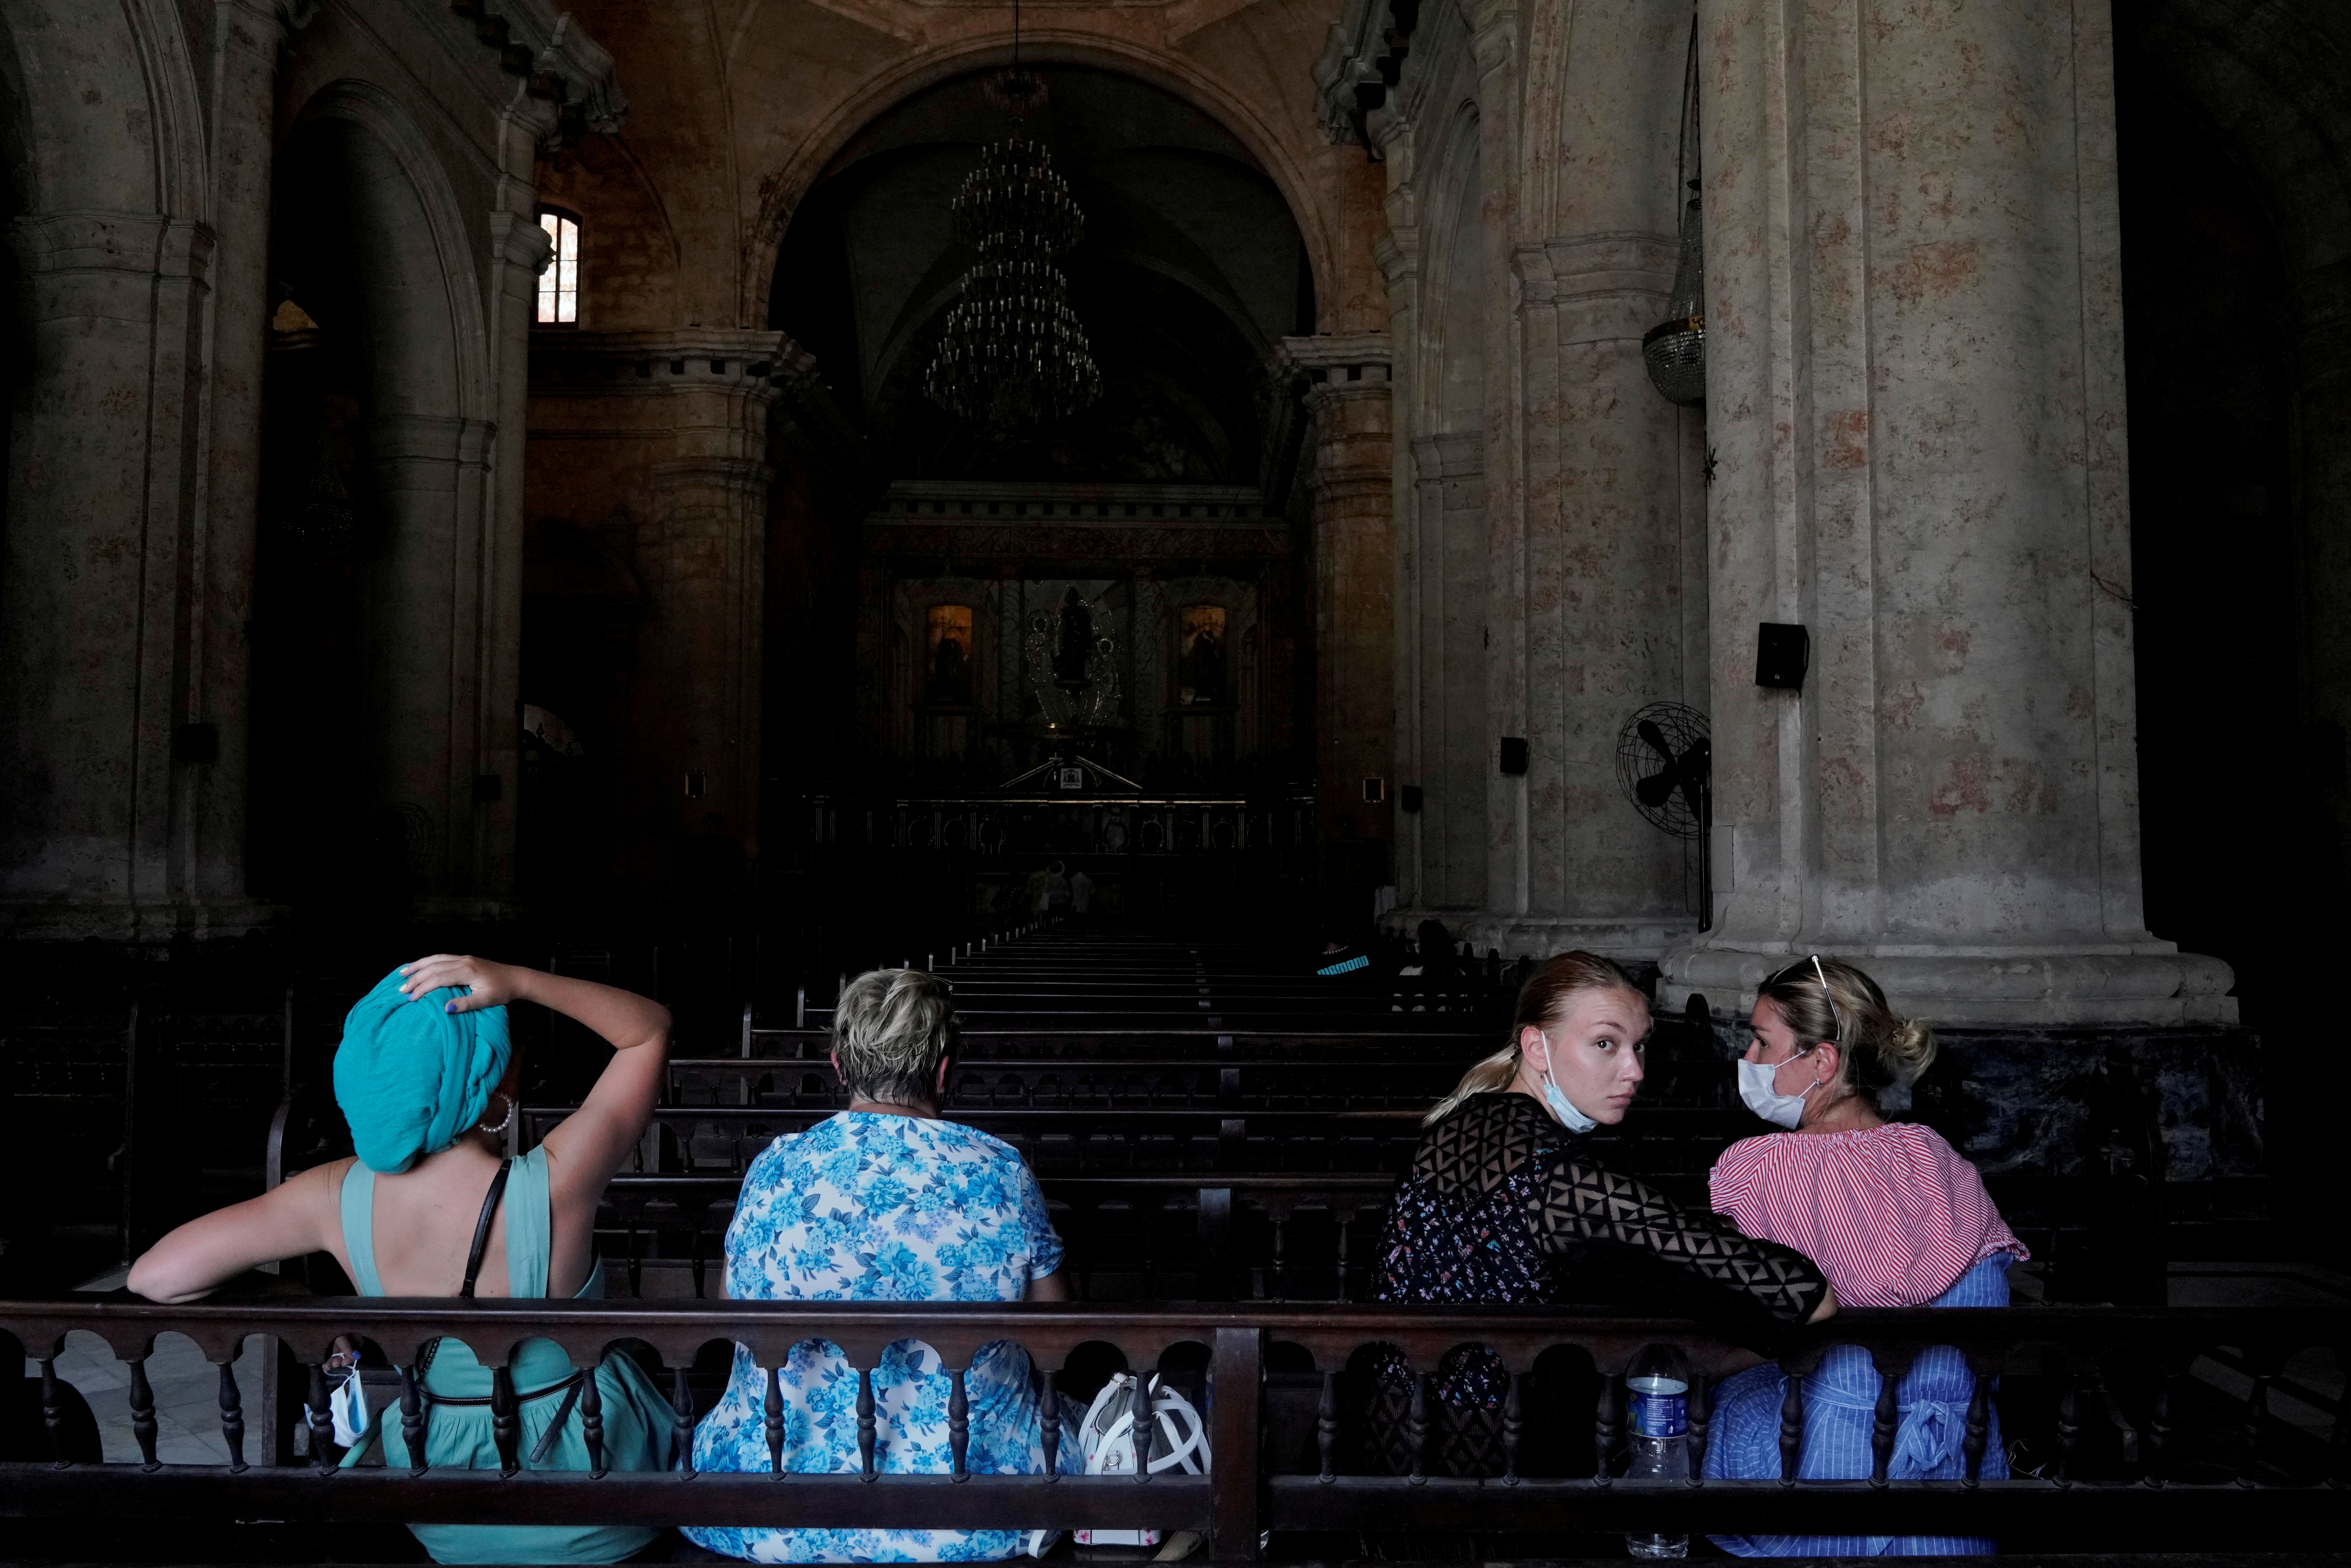 Tourists from Russia visit the Havana's Cathedral